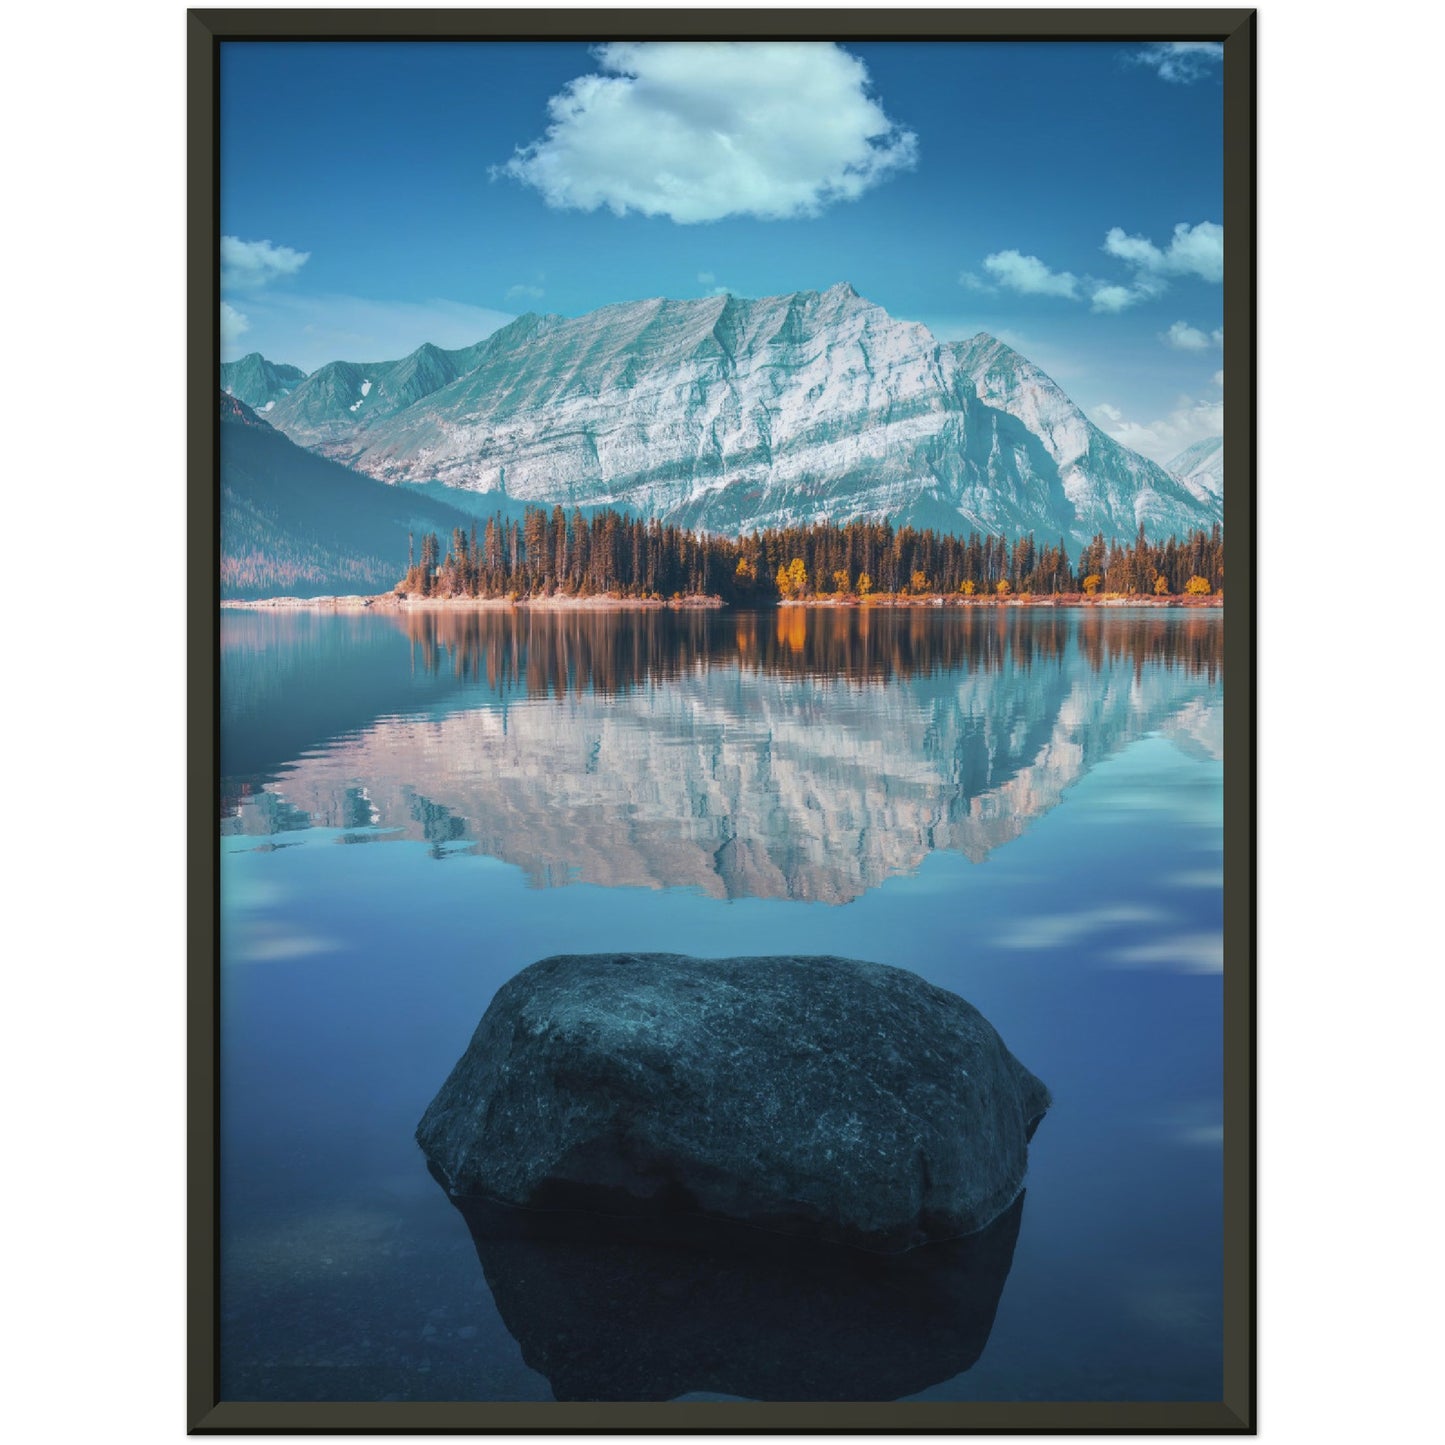 Iconic Reflections - Museum-Quality Matte Paper Metal Framed Poster